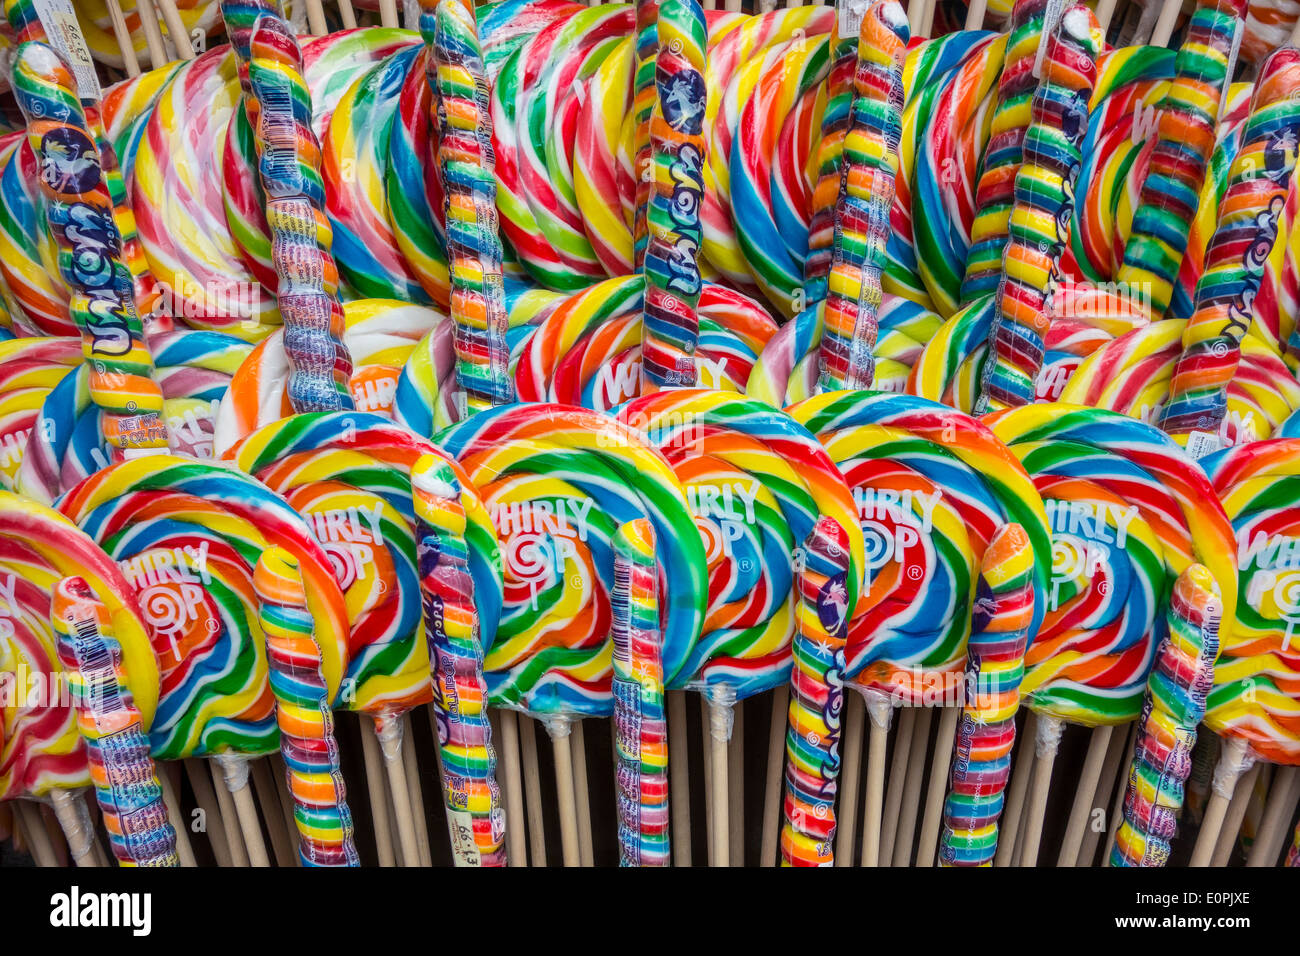 Multi Coloured Lollypops Sweets Sweet Shop Candy Candies Stock Photo